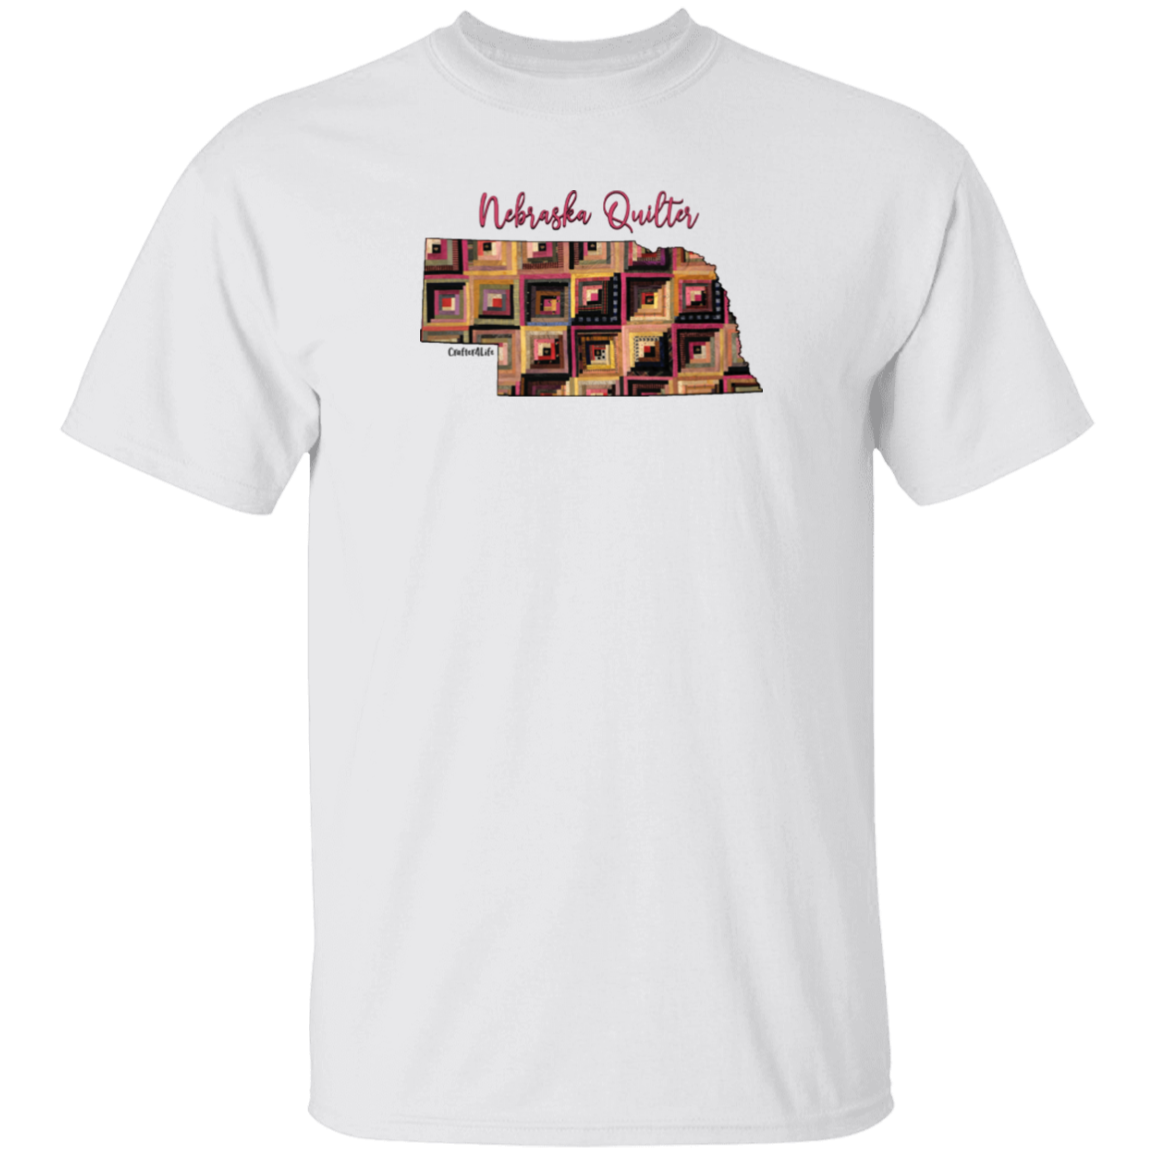 Nebraska Quilter T-Shirt, Gift for Quilting Friends and Family